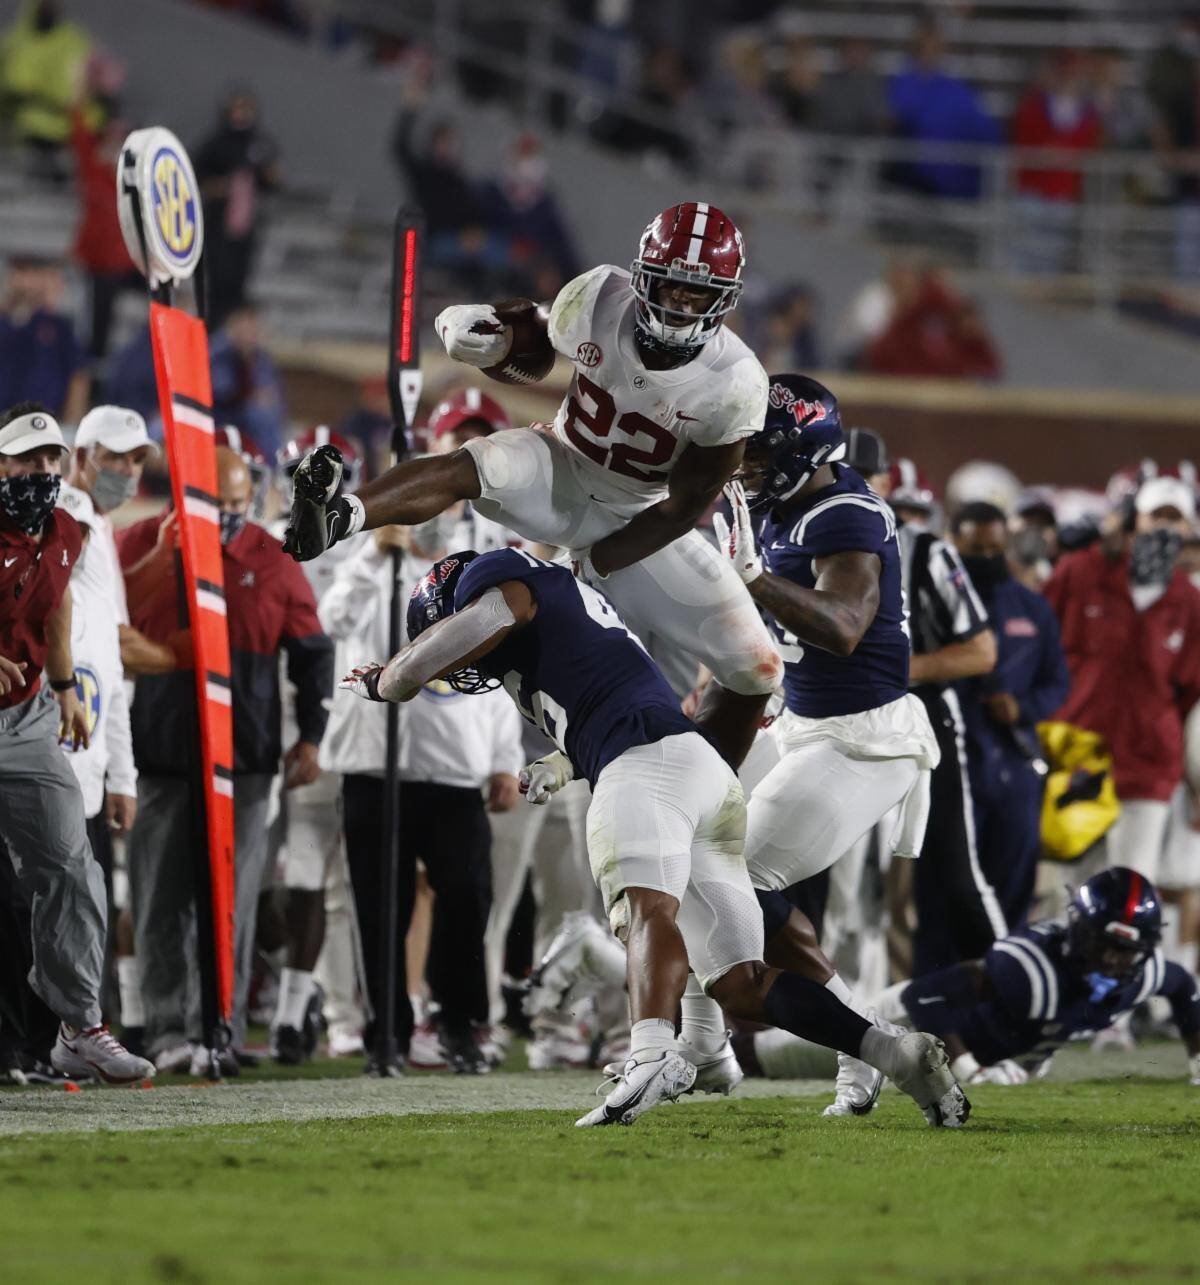 Senior running back Najee Harris- RB – Alabama gashed the Rebel defense for 206 yards rushing and five touchdowns on 23 carries.